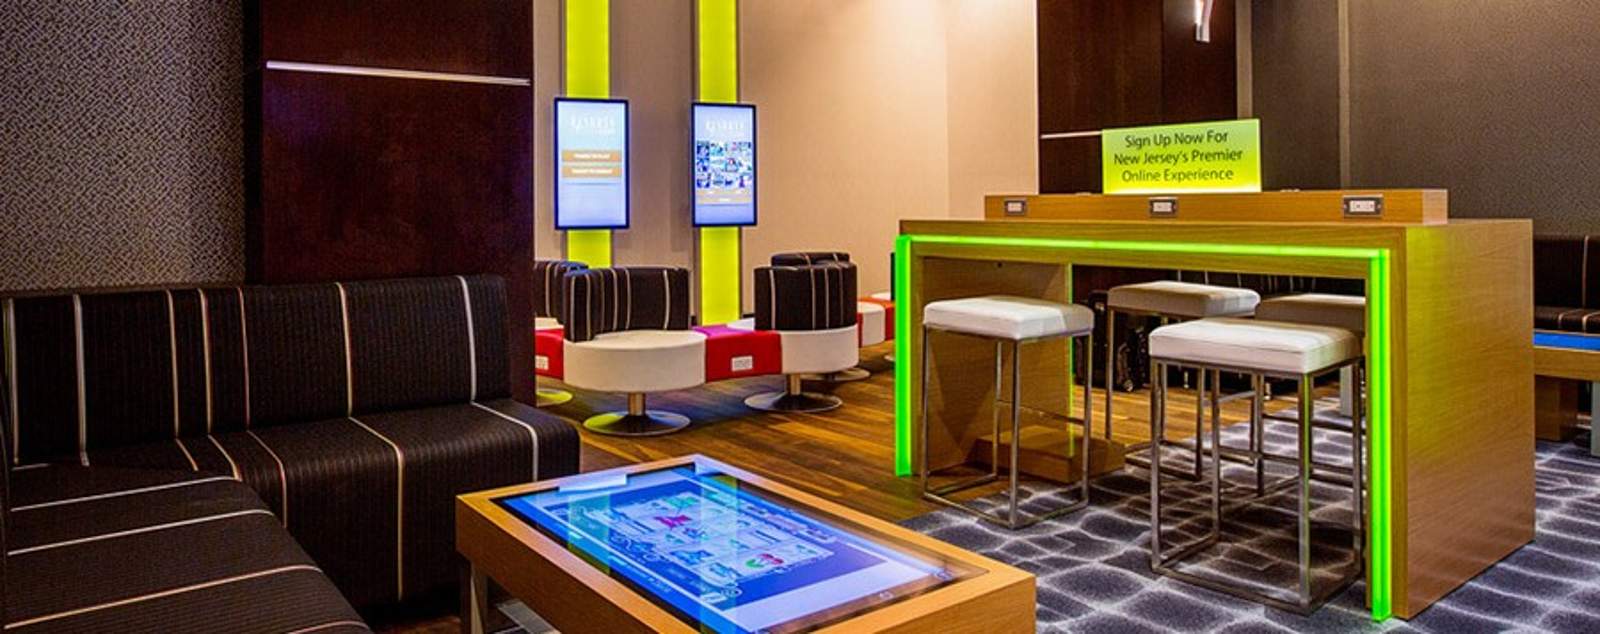 New iGaming Lounge Gets New Jersey Into the Game